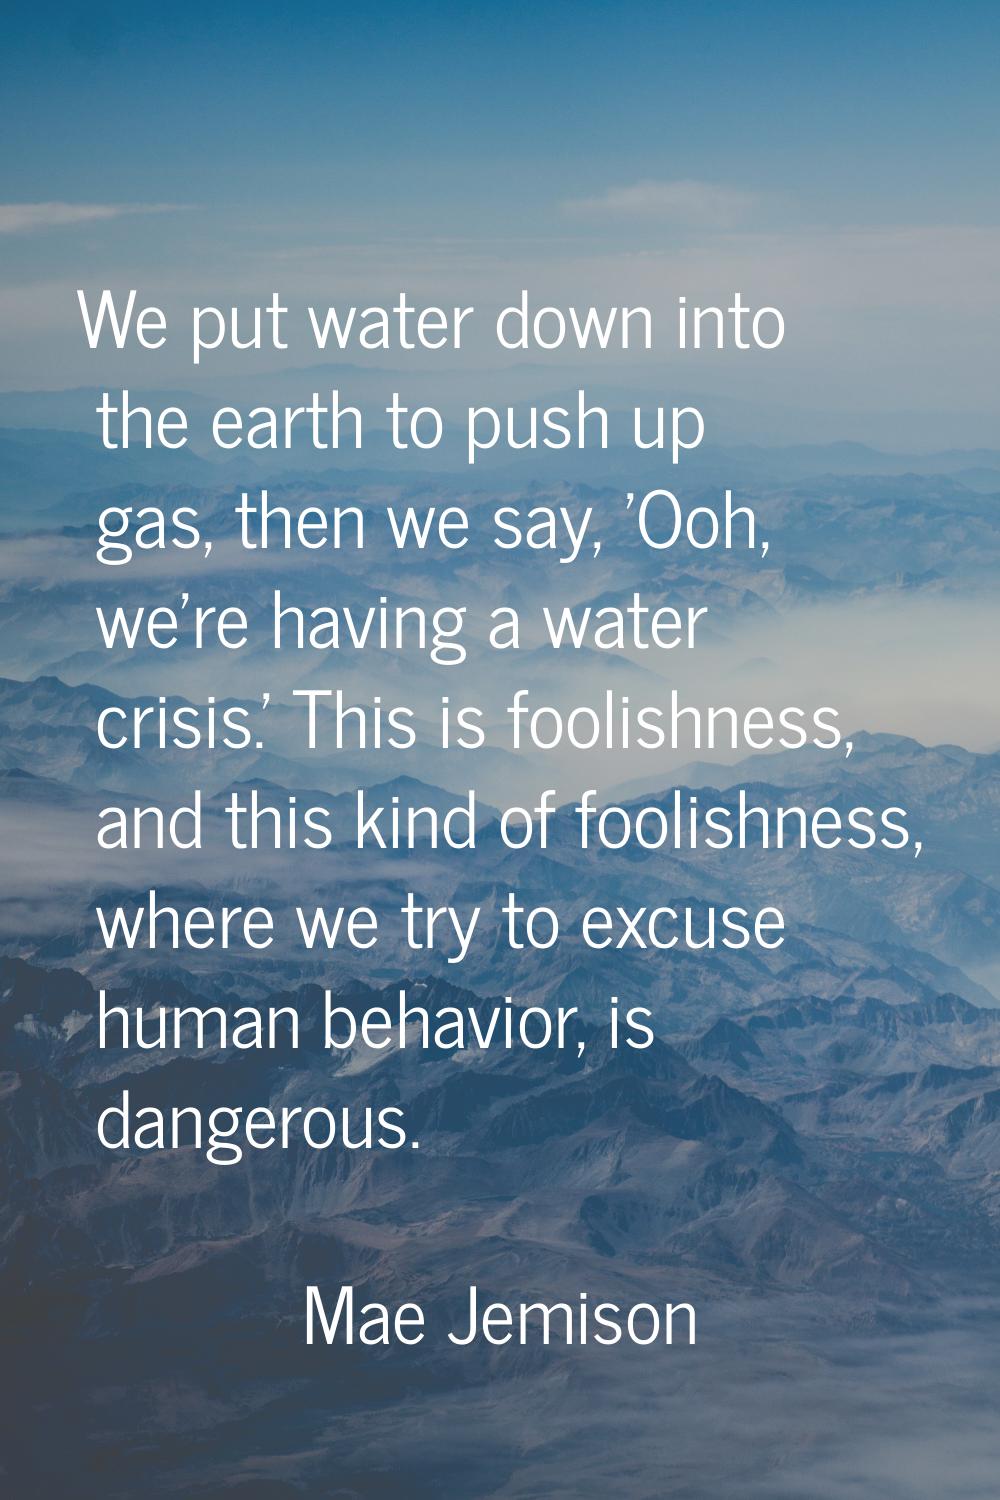 We put water down into the earth to push up gas, then we say, 'Ooh, we're having a water crisis.' T